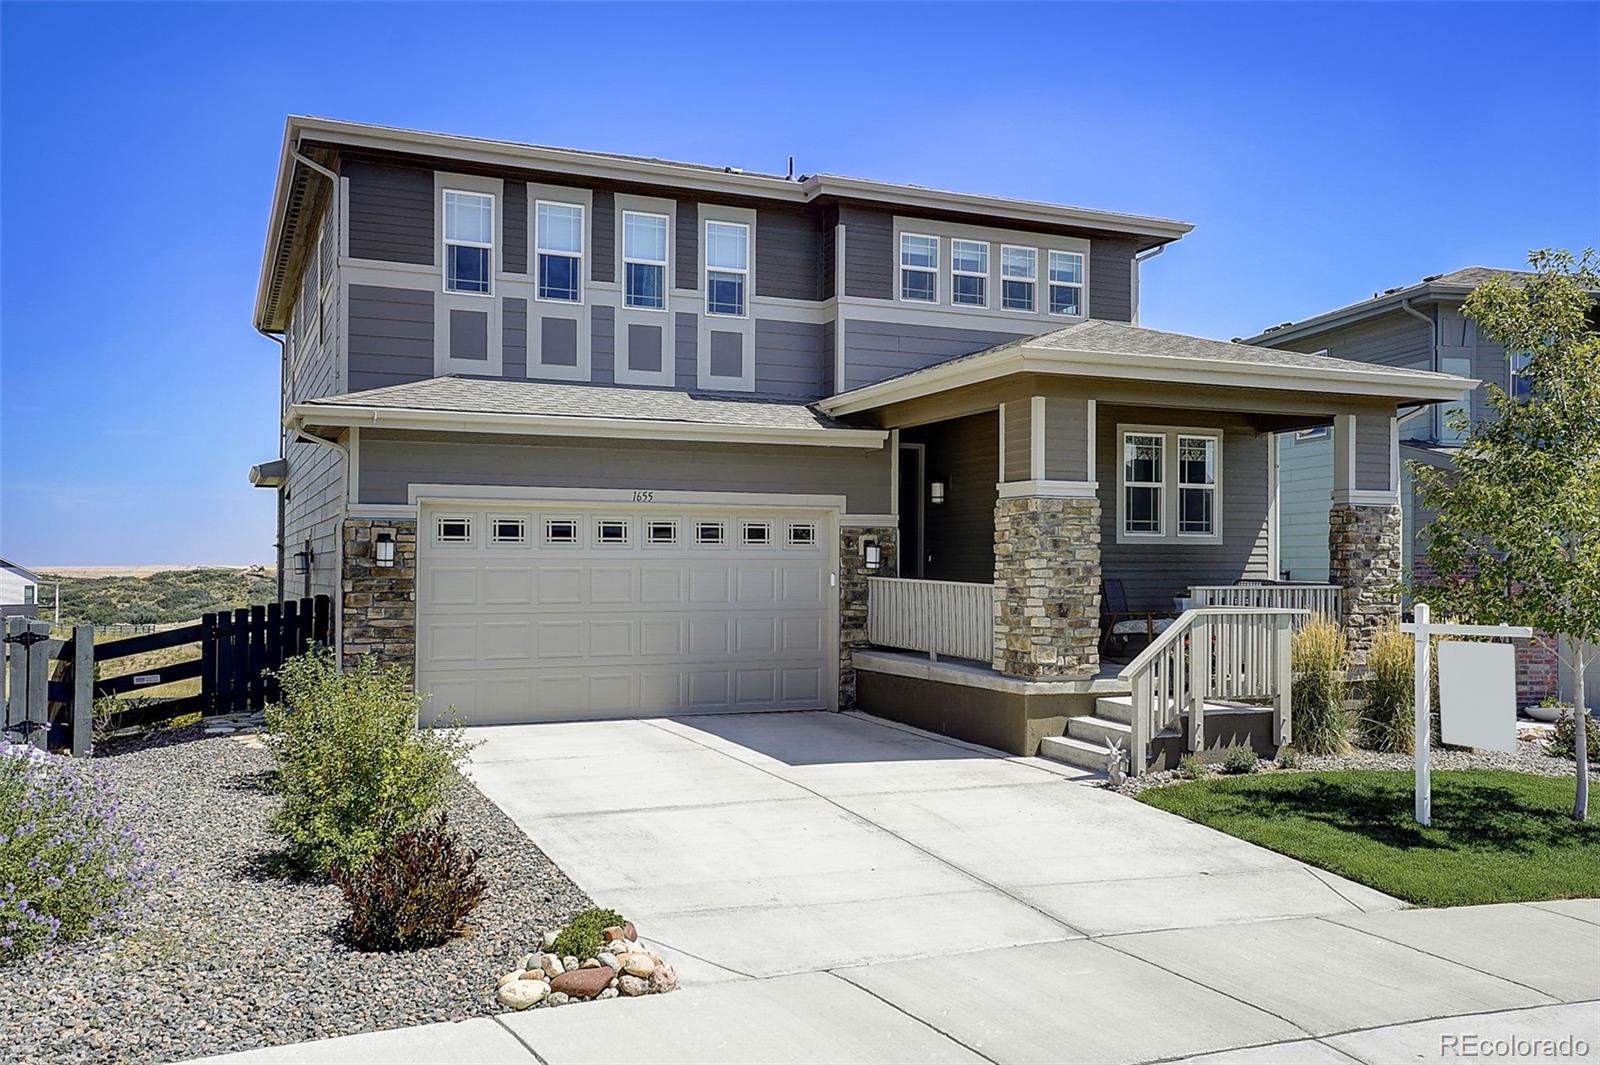 1655  Stable View Drive, castle pines MLS: 7693919 Beds: 4 Baths: 4 Price: $825,000